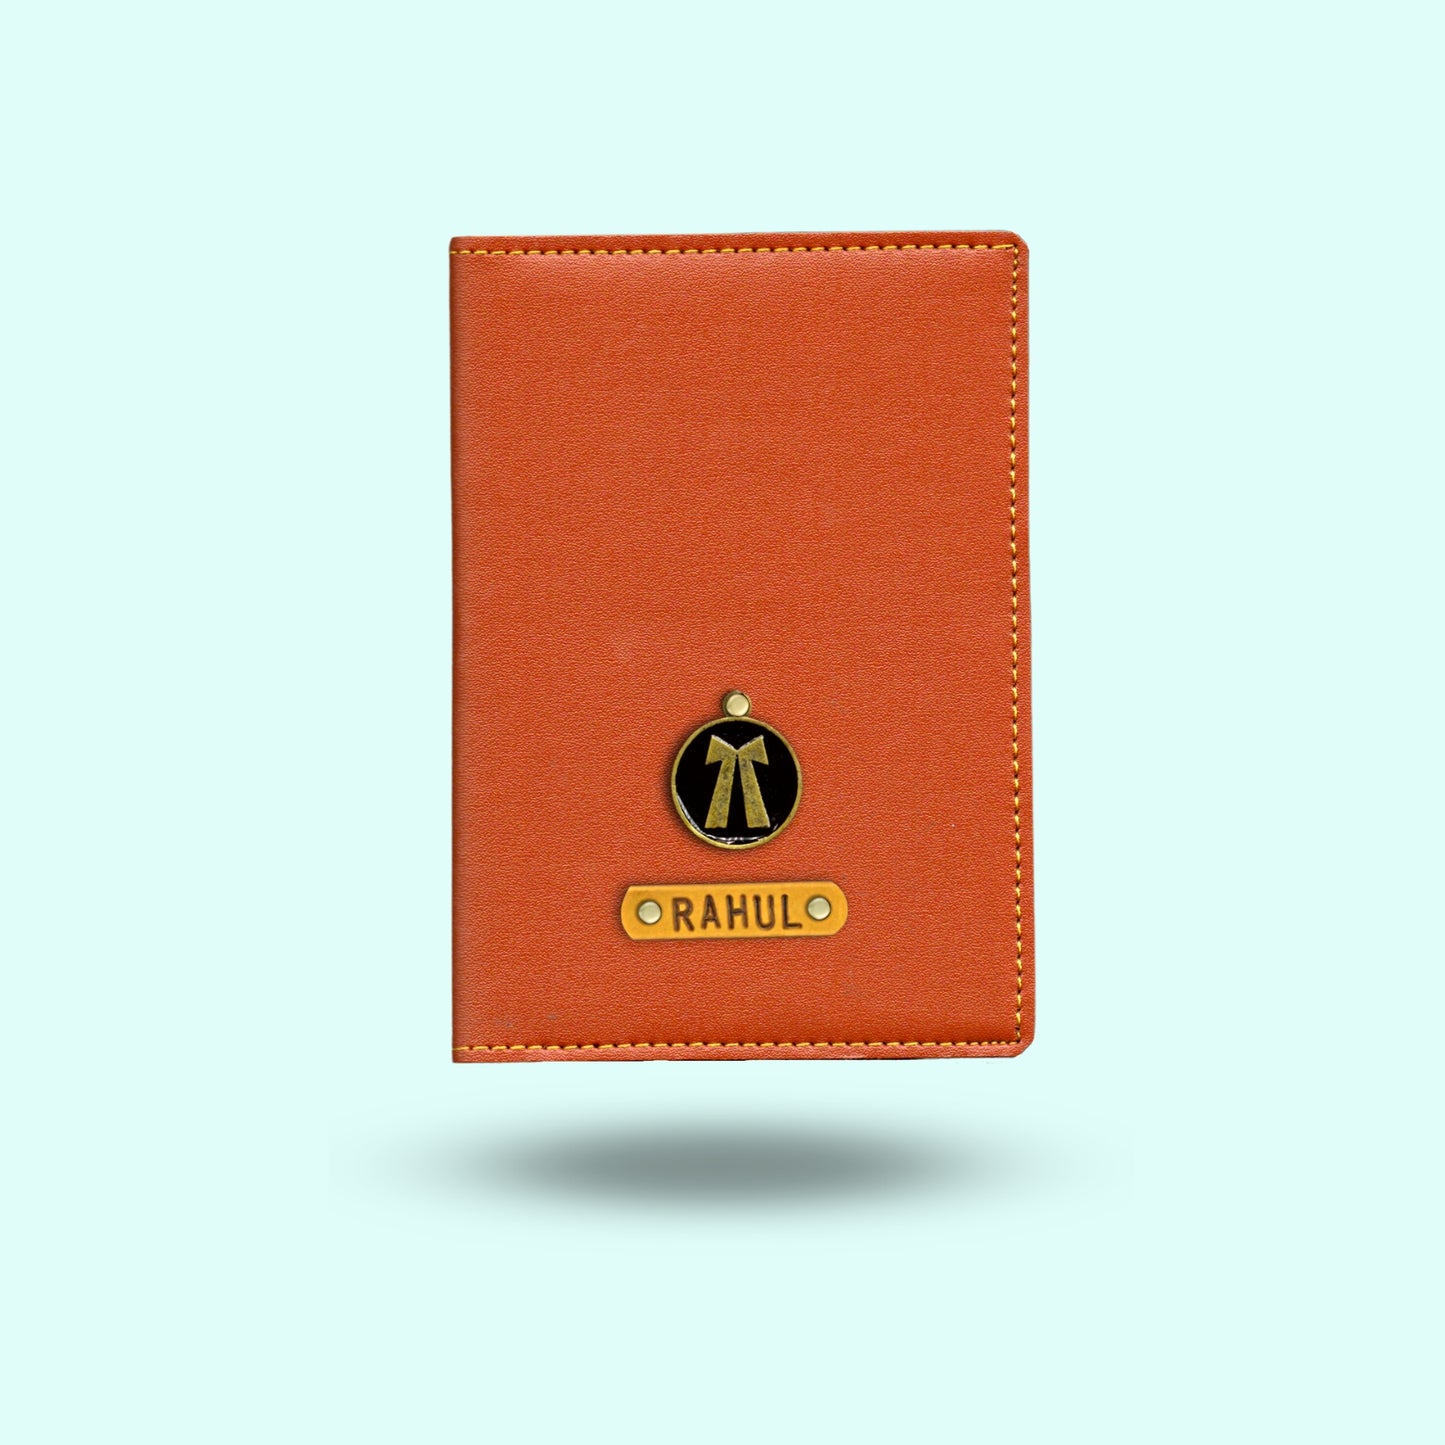 Personalized Passport Cover For Advocate